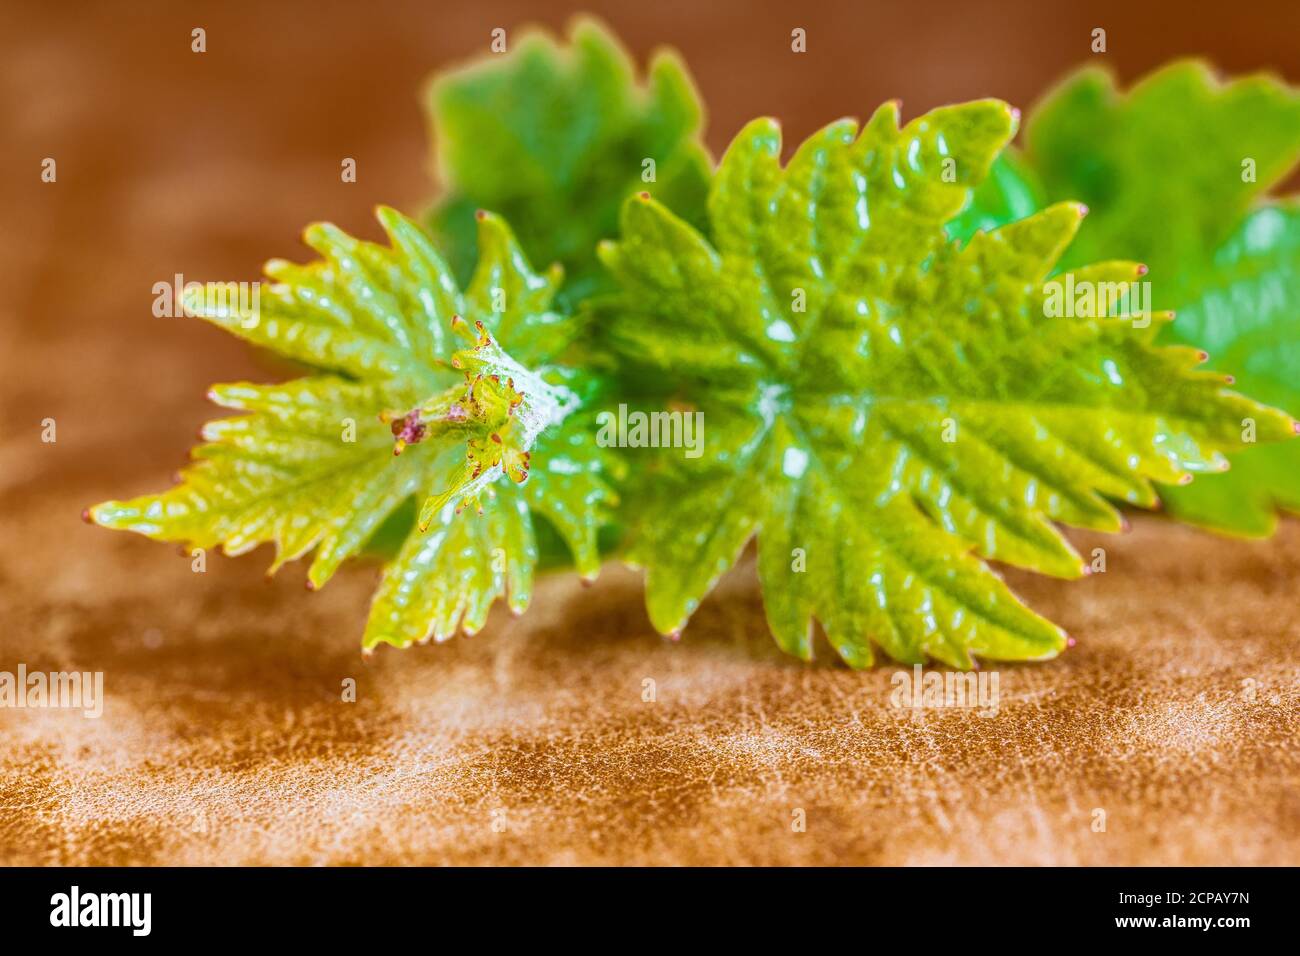 Grapevine, shoot, close-up, leaves Stock Photo